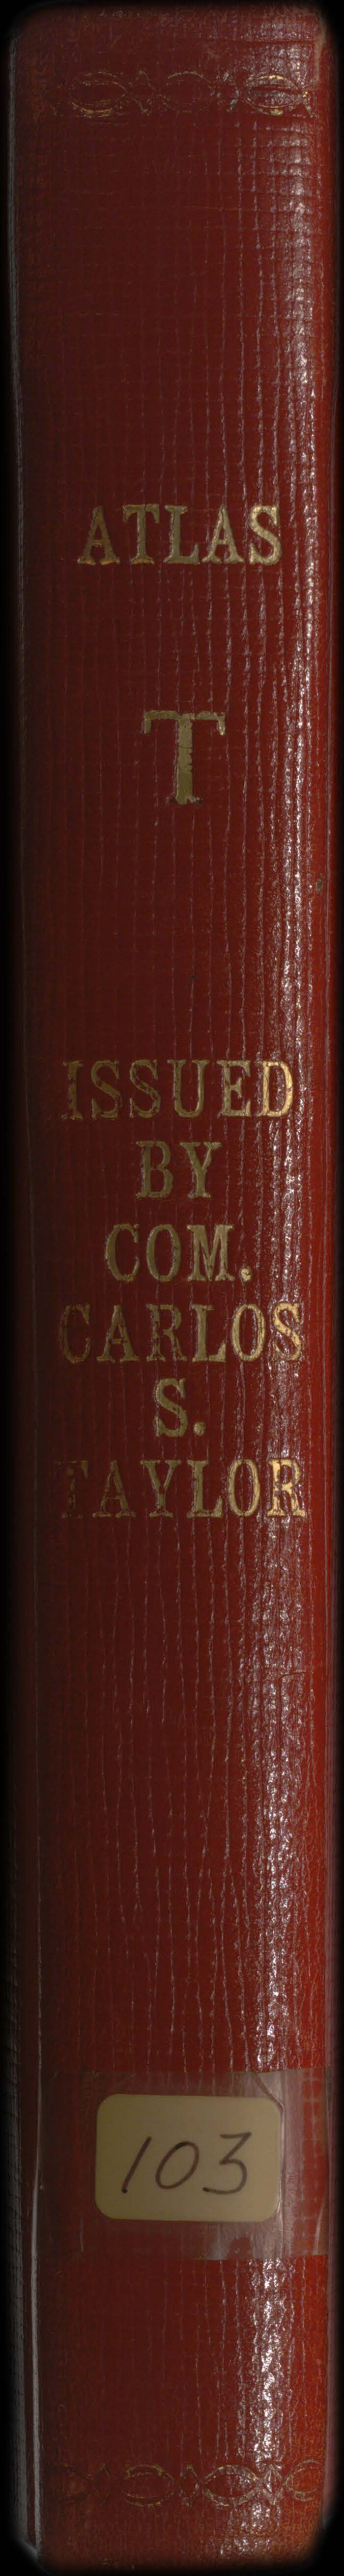 94536, Atlas T - Titles to Frontier Settlers issued by the Commissioner Carlos S. Taylor, Historical Volumes